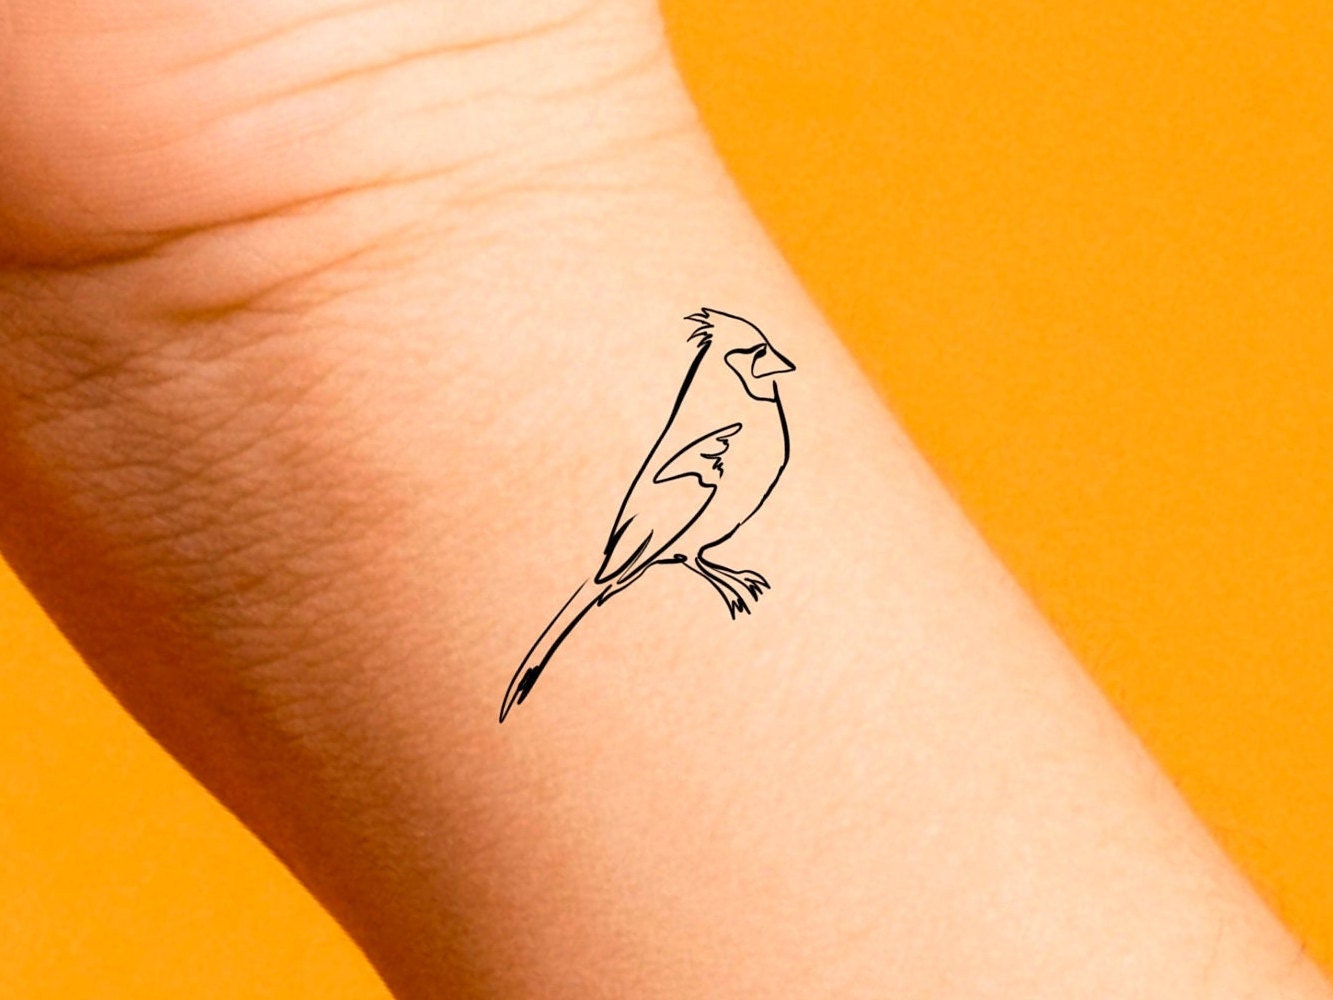 The Cardinal Skin Art  Gallery  This proud father decided to forever  remember a wonderful day at the beach with his little one by getting this  minimalist line portrait tattoo by